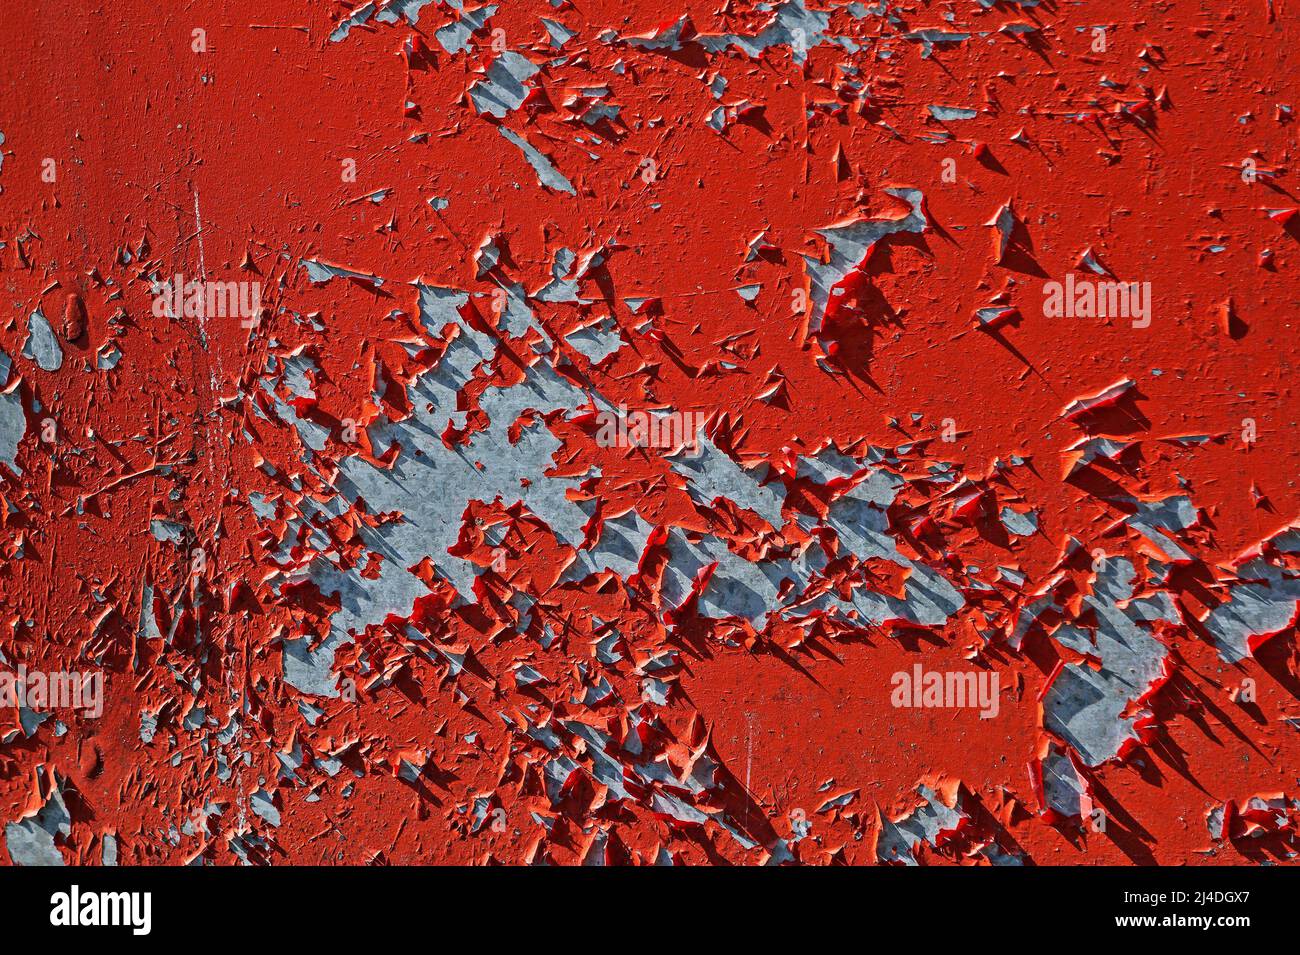 Damaged red metallic surface with peeling paint Stock Photo